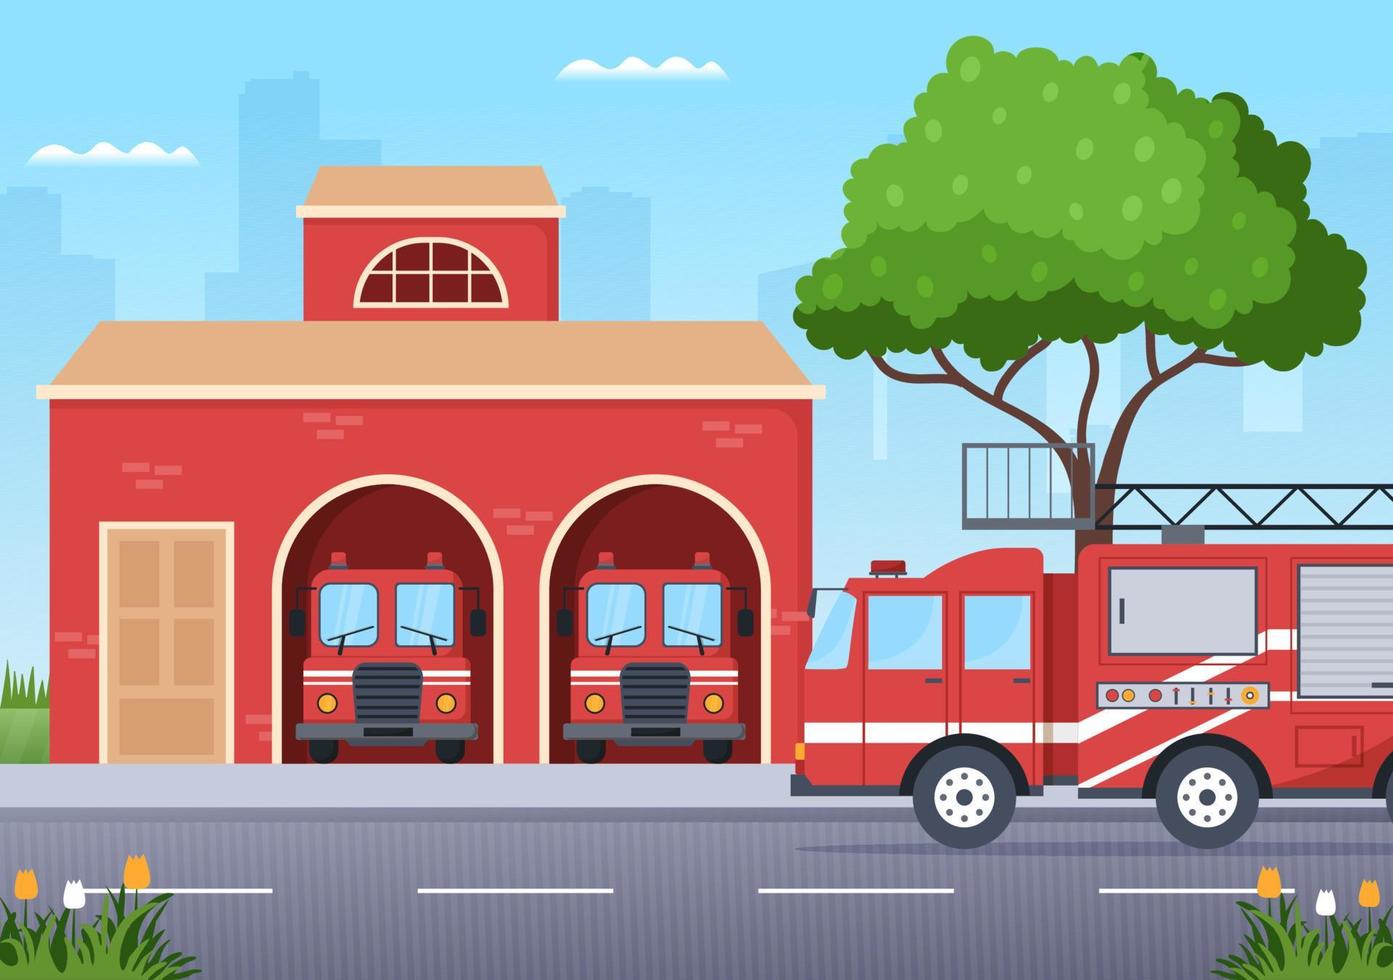 Fire Department with Firefighters Extinguishing House, Forest and Helping People in Various Situations in Flat Hand Drawn Cartoon Illustration vector